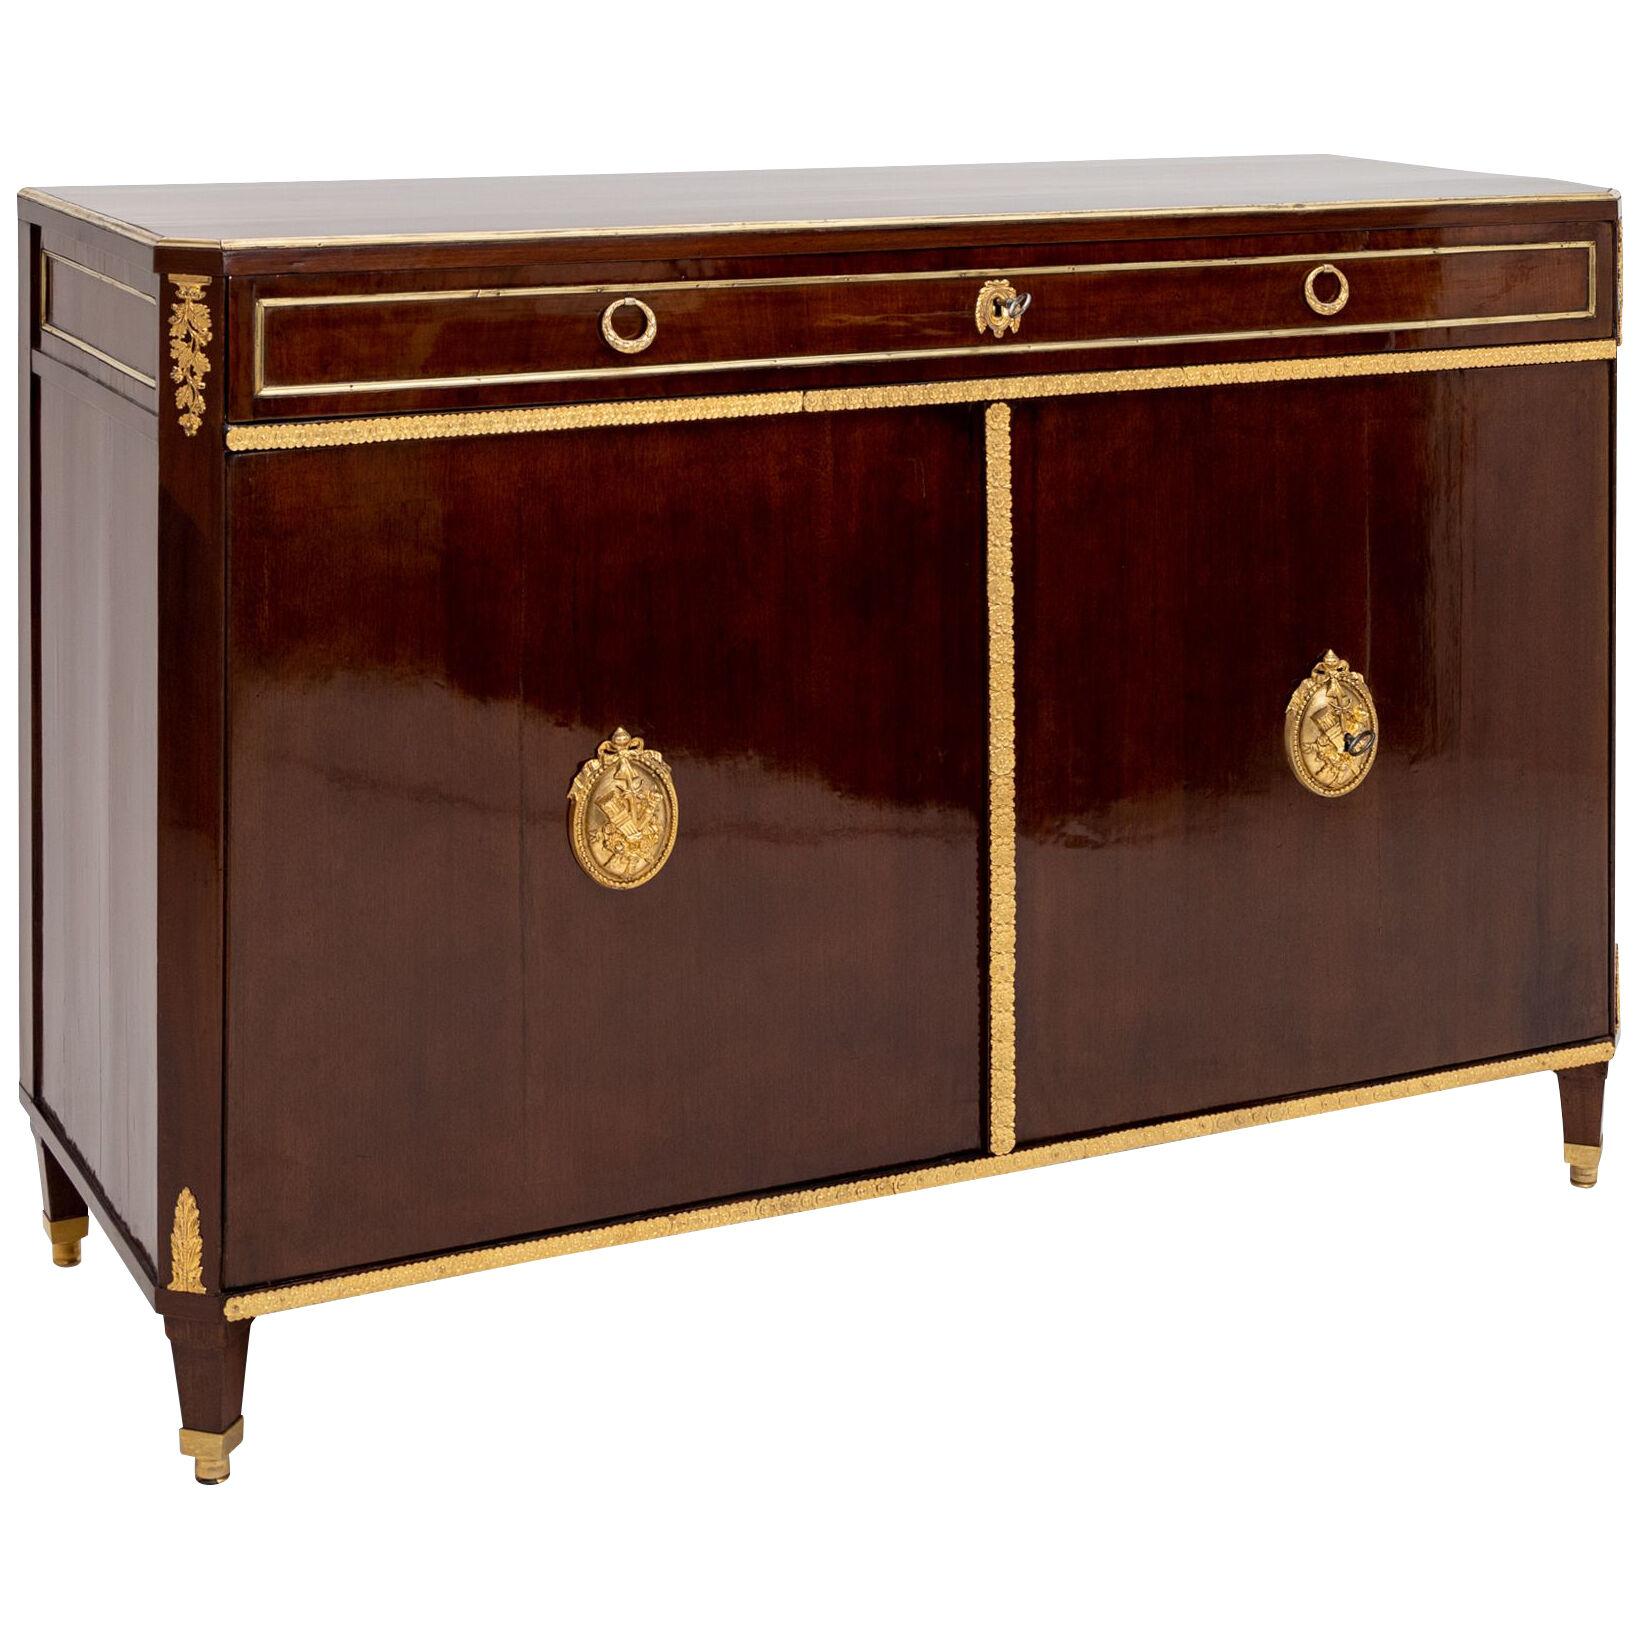 Empire Trumeau Cabinet, Early 19th Century